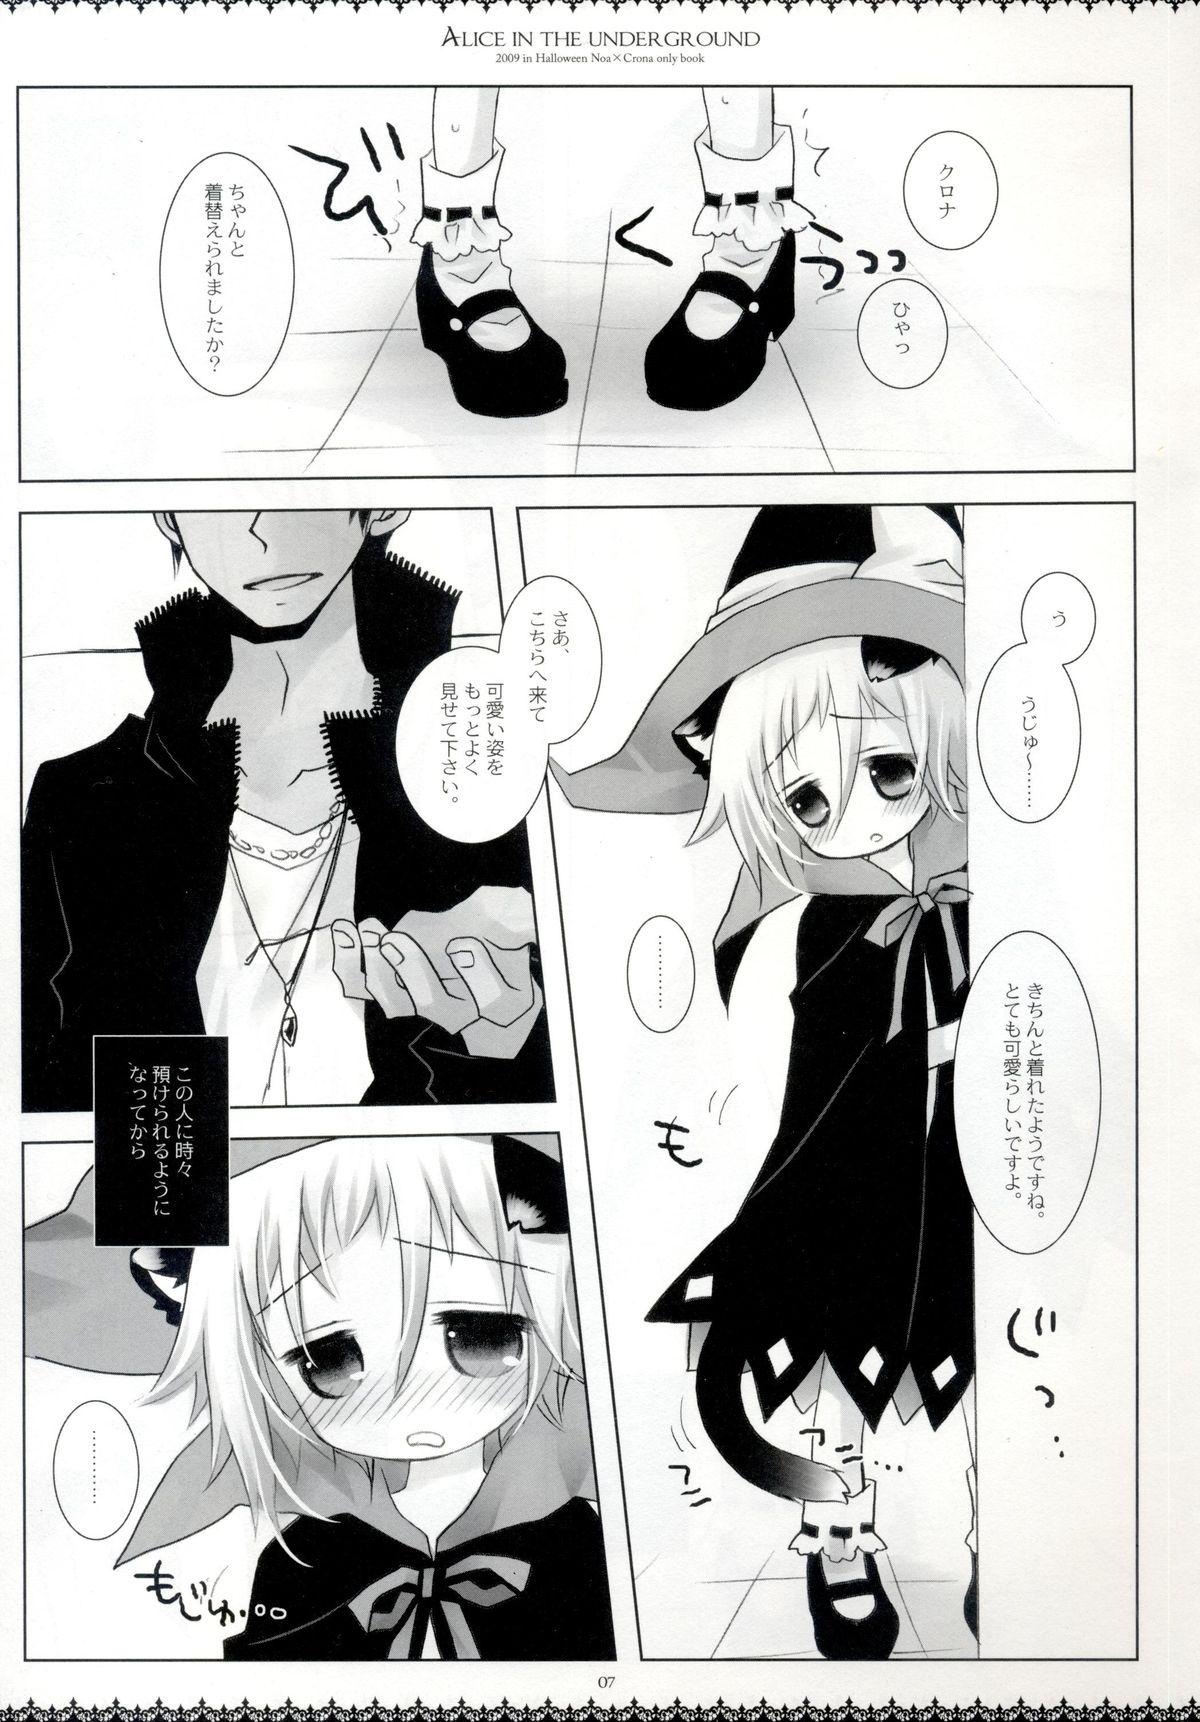 Married Alice in the underground - Soul eater Erotica - Page 6